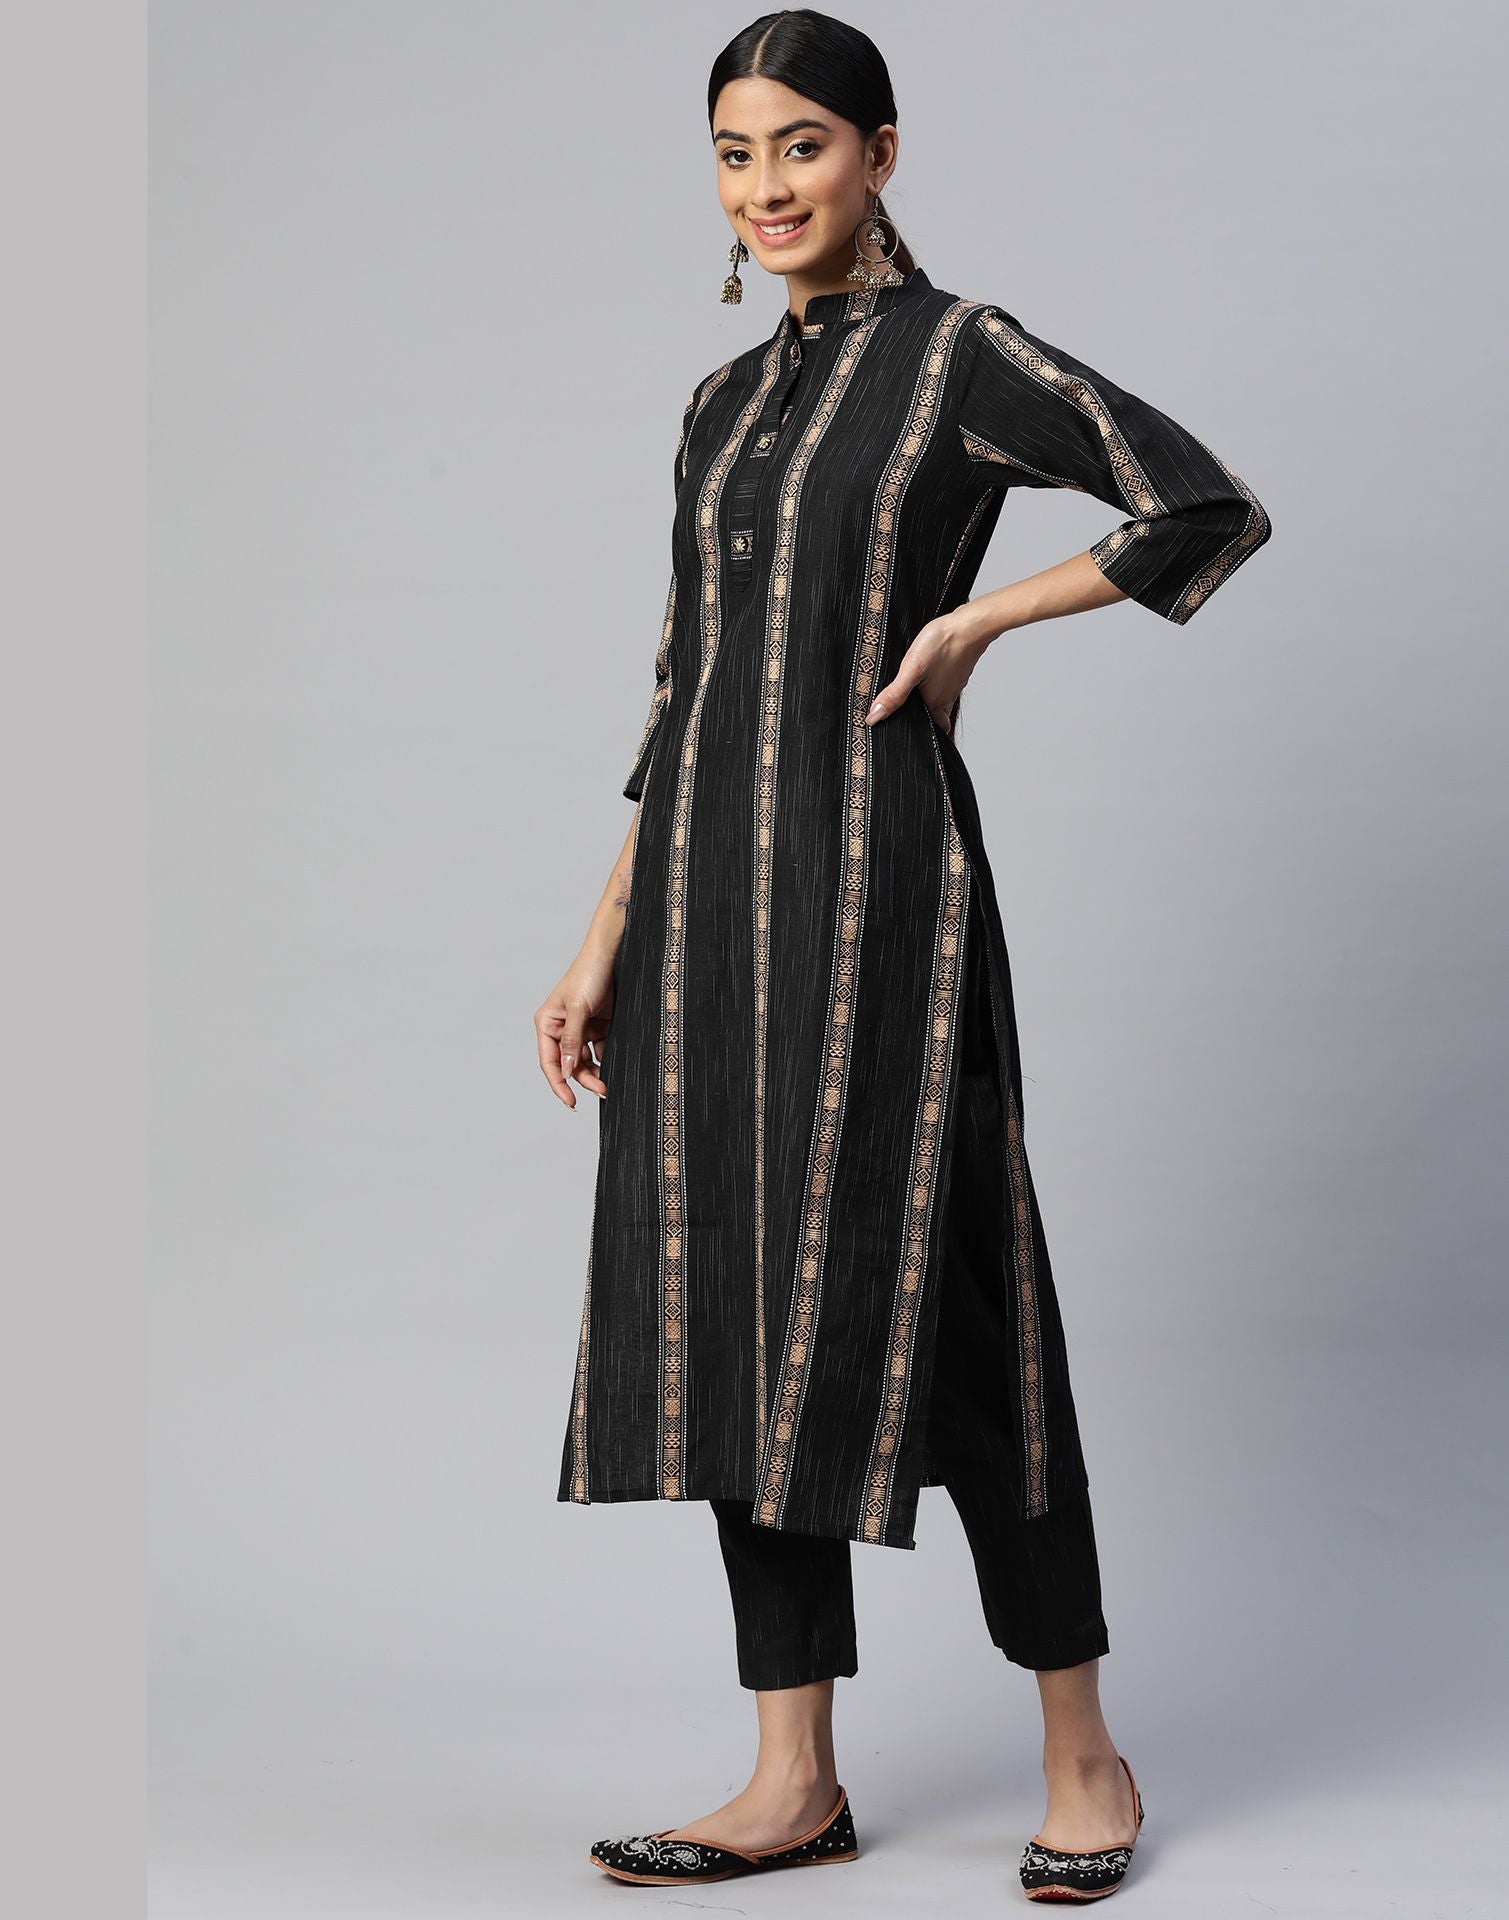 FABRR - Black Rayon Women's Straight Kurti Price in India - Buy FABRR -  Black Rayon Women's Straight Kurti Online at Snapdeal